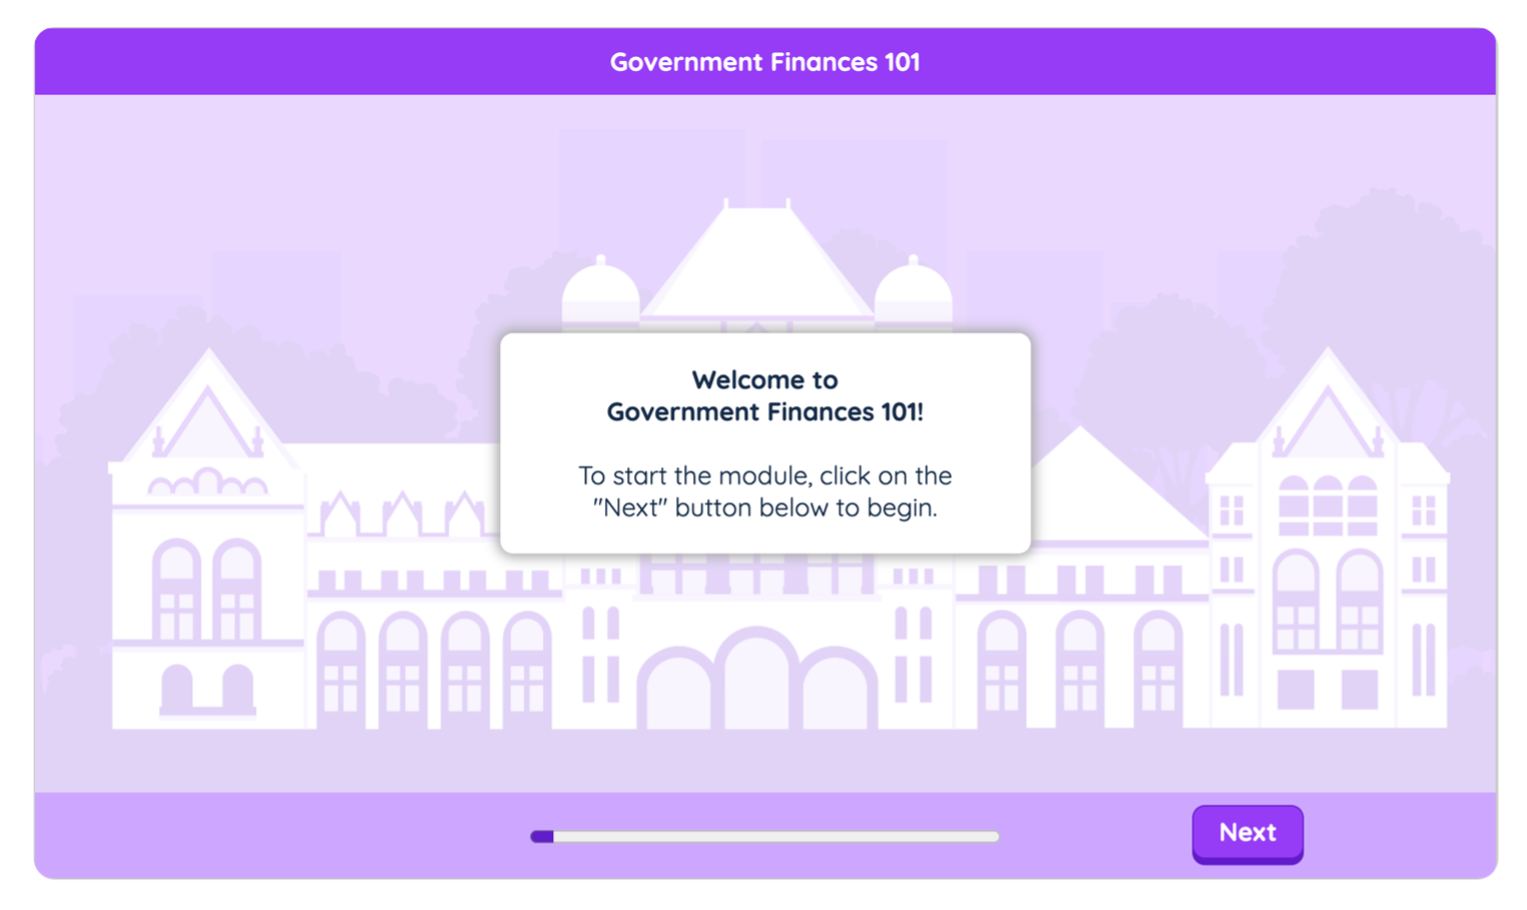 The FAO’s first learning module, “Government Finances 101,” is a free, interactive tool that provides MPPs, their staff and external stakeholders with an opportunity to learn about Ontario’s fiscal cycle through videos, graphics and interactive games.